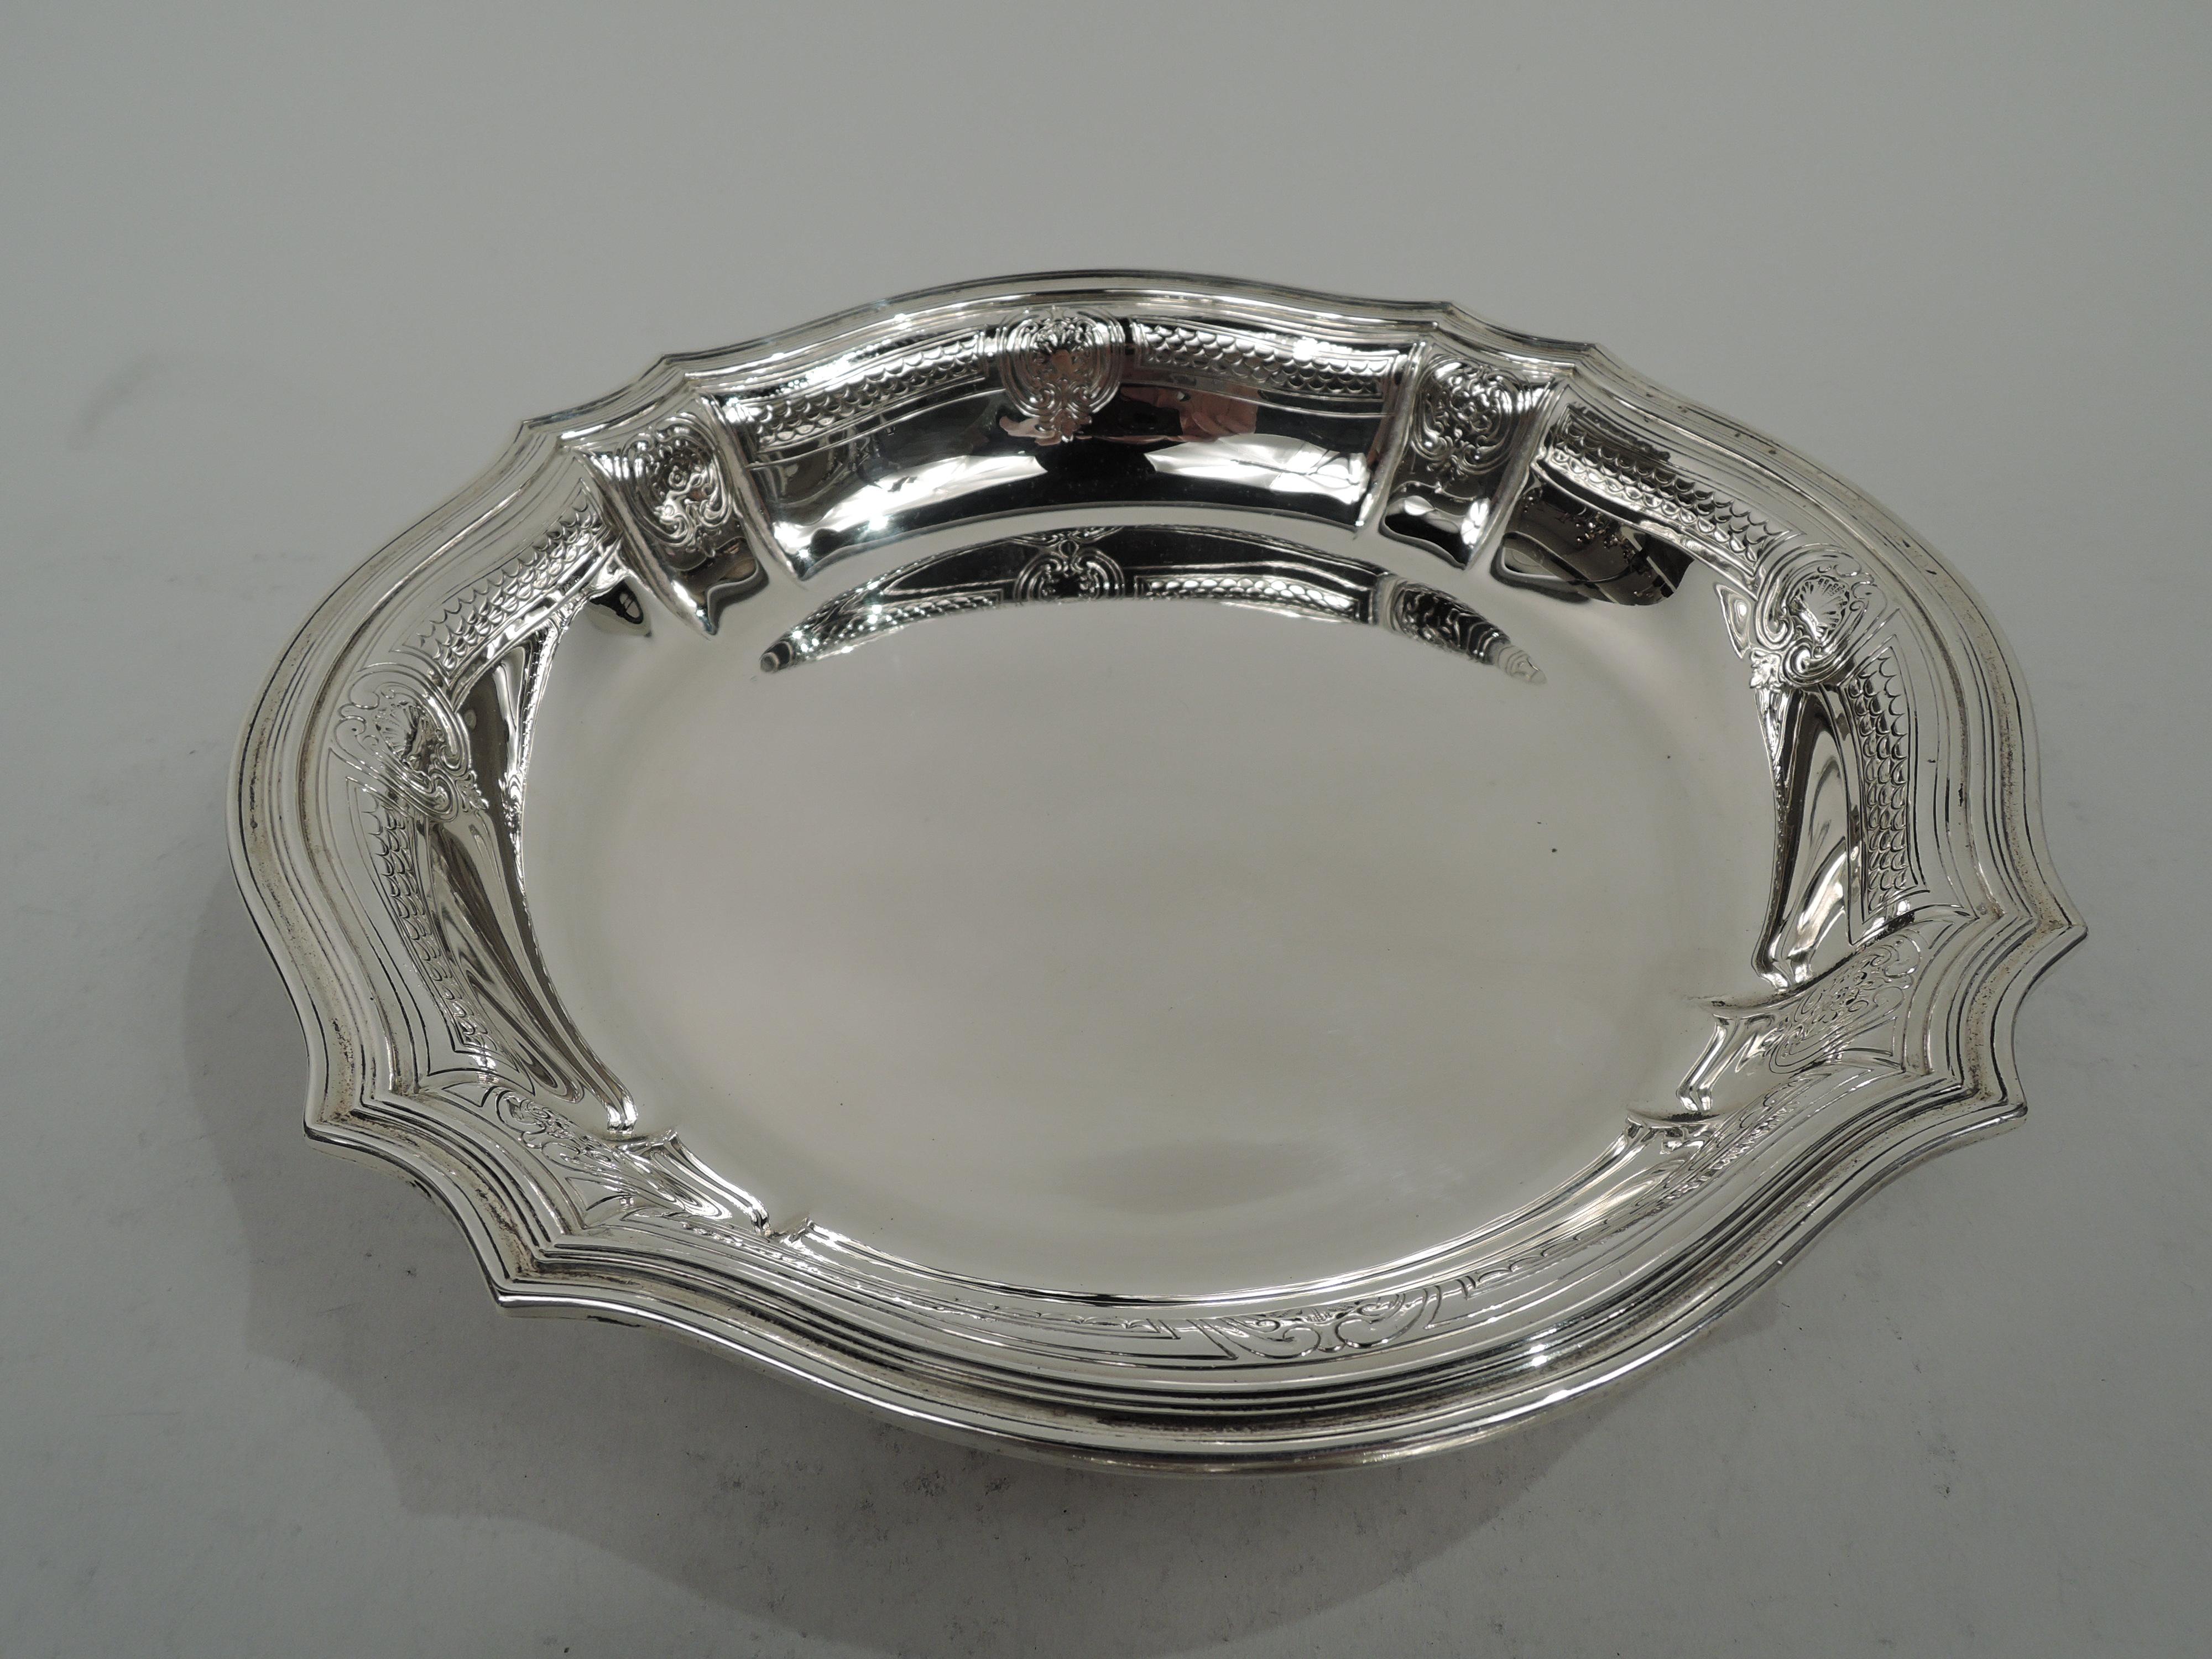 Tiffany Edwardian Modern Classical Sterling Silver Round Serving Bowl For Sale 1